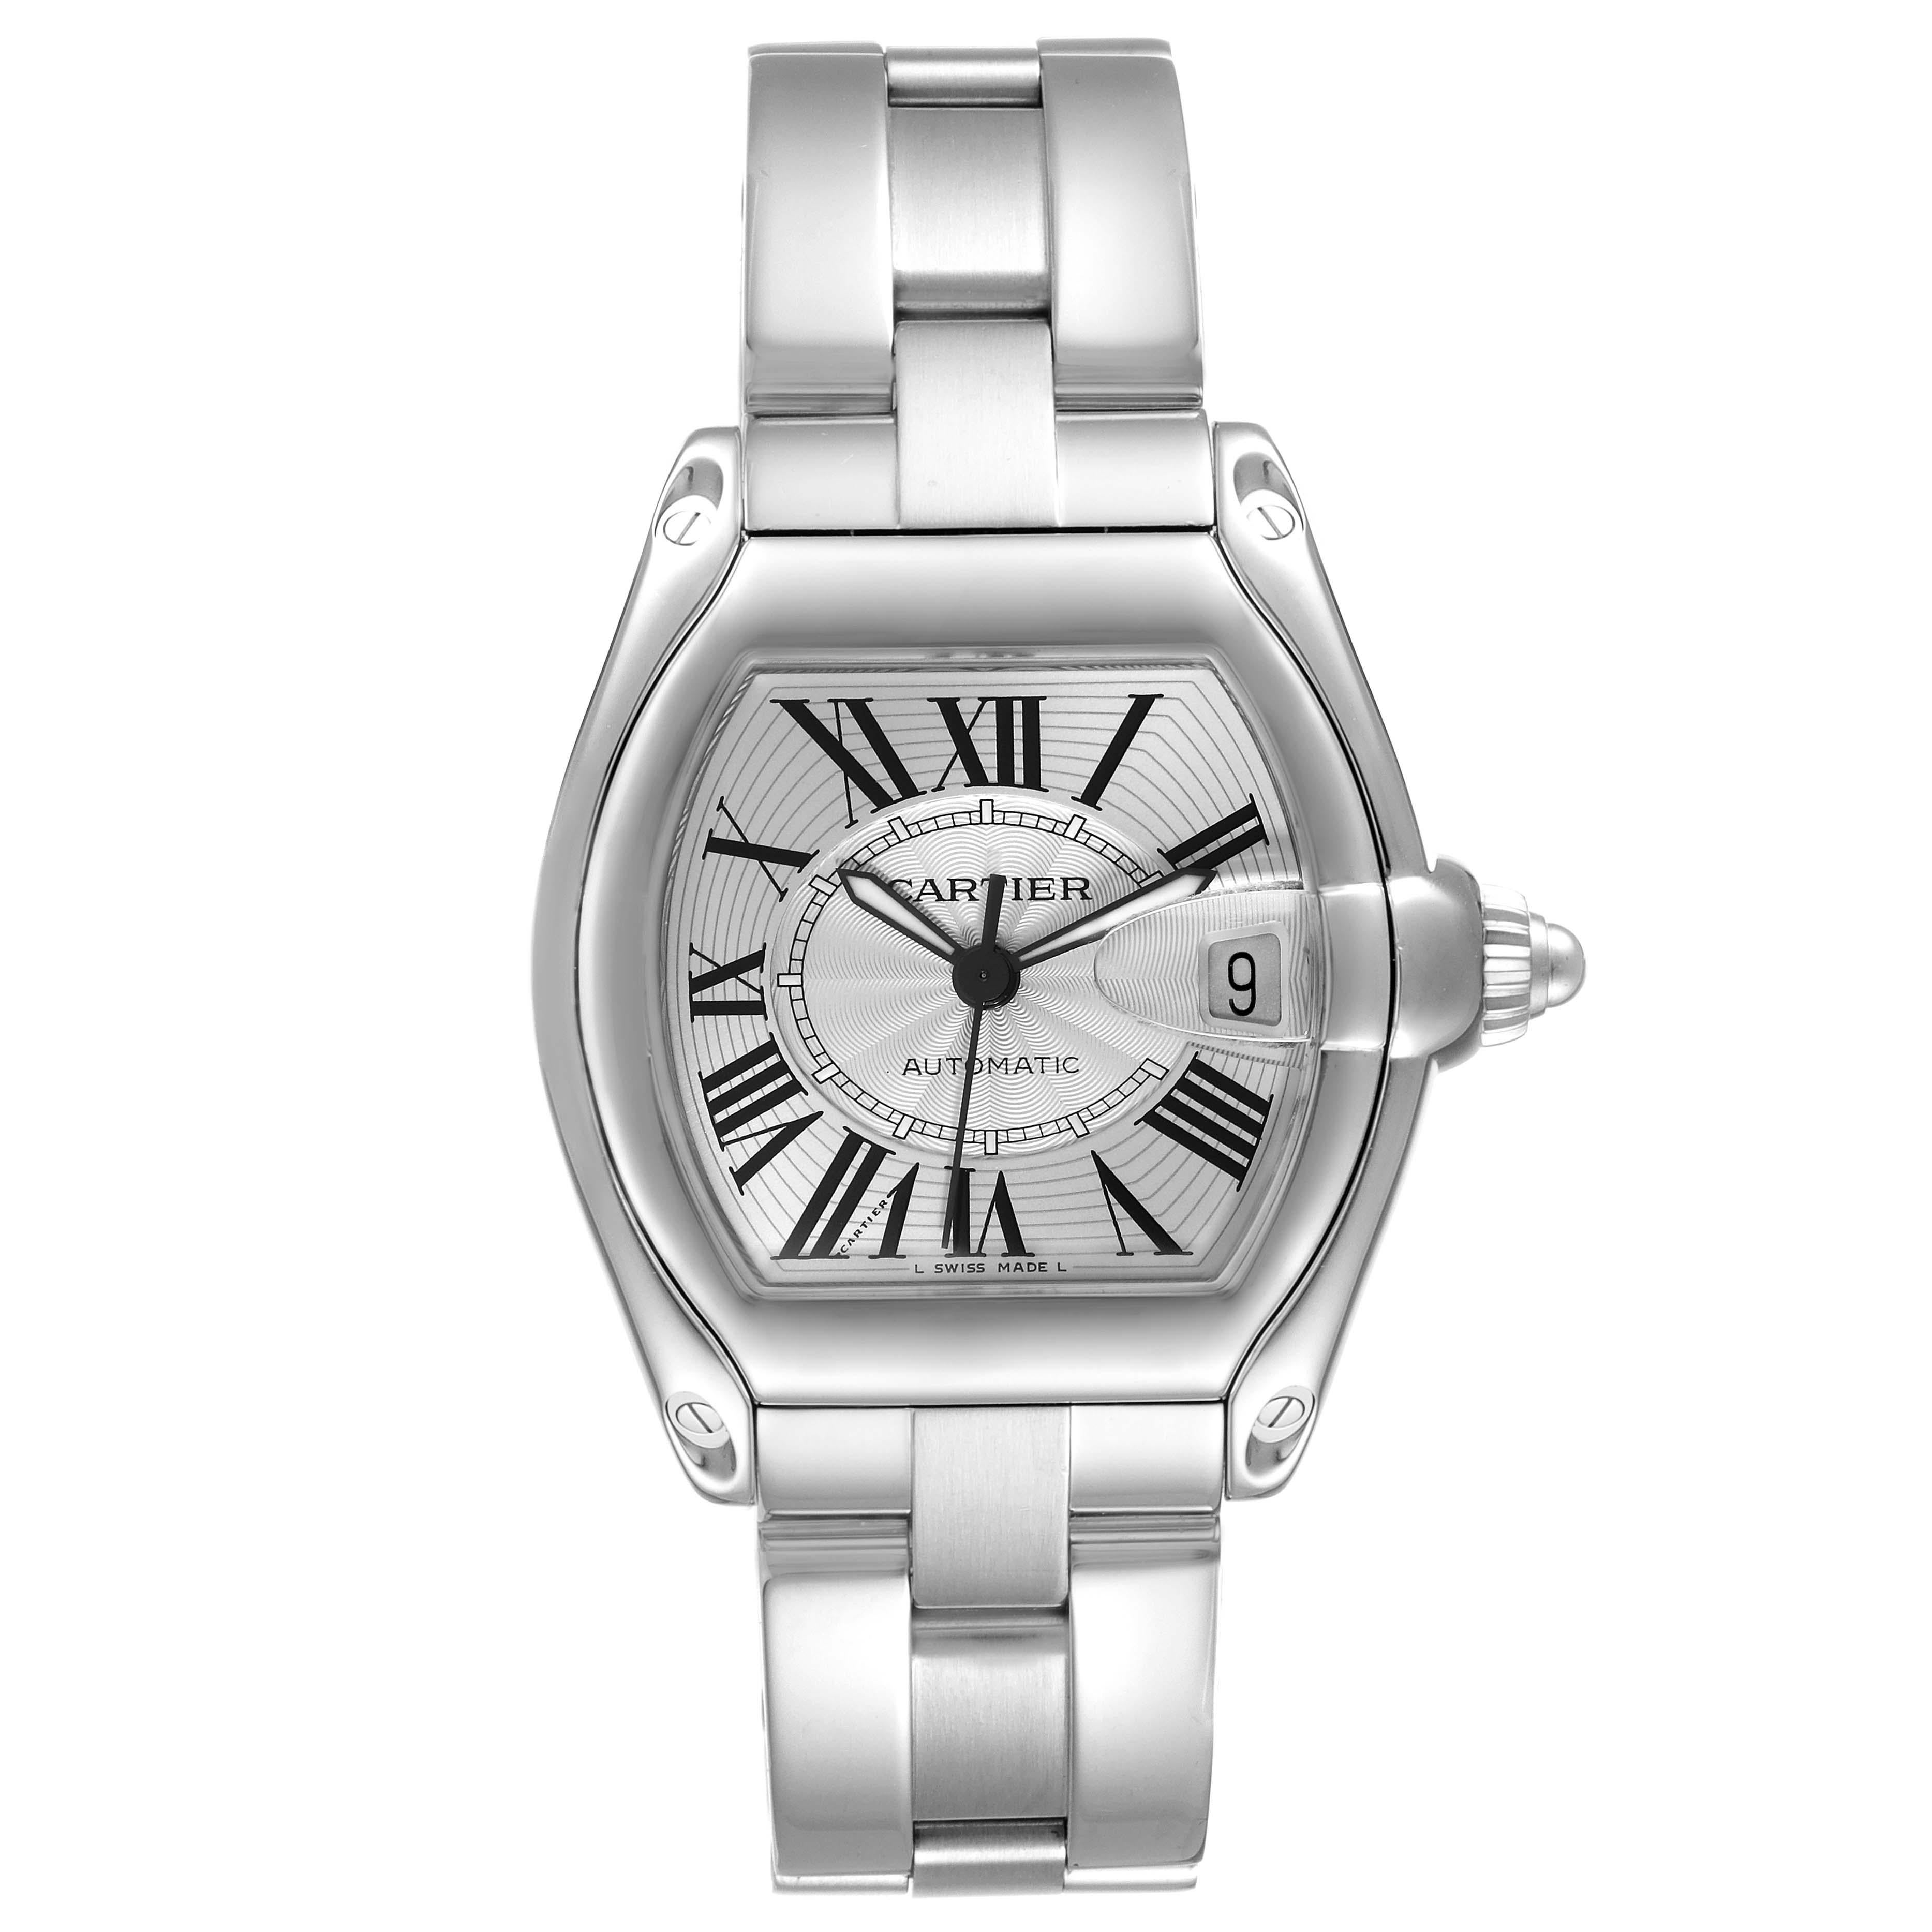 Cartier Roadster Large Silver Dial Steel Mens Watch W62025V3 Box Papers. Automatic self-winding movement. Stainless steel tonneau shaped case 38 x 43 mm. . Scratch resistant sapphire crystal with cyclops magnifying glass. Silver dial with black